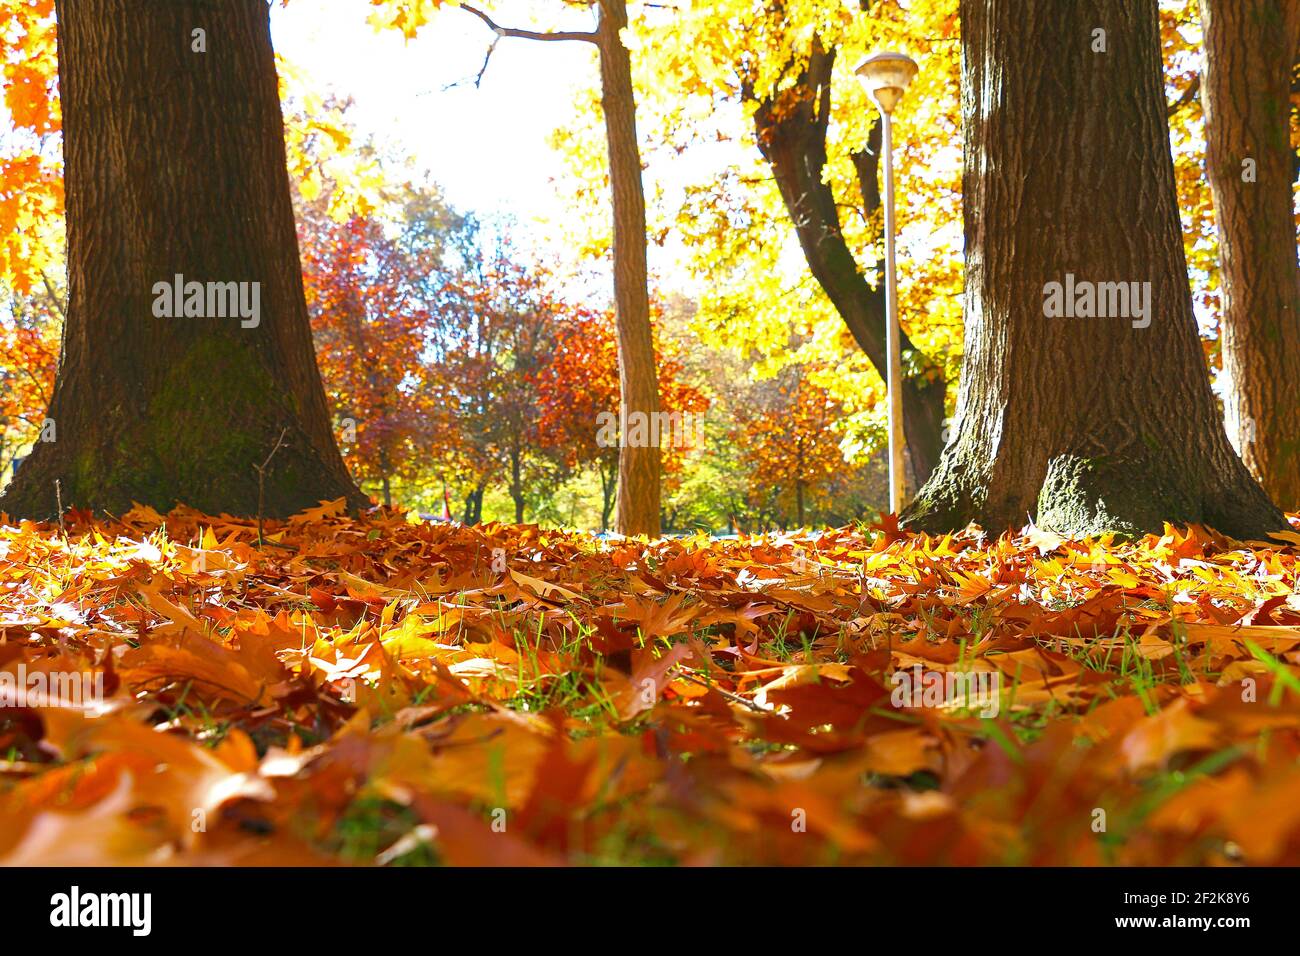 Colorful Autumn Trees and Leaves in the Park Stock Photo